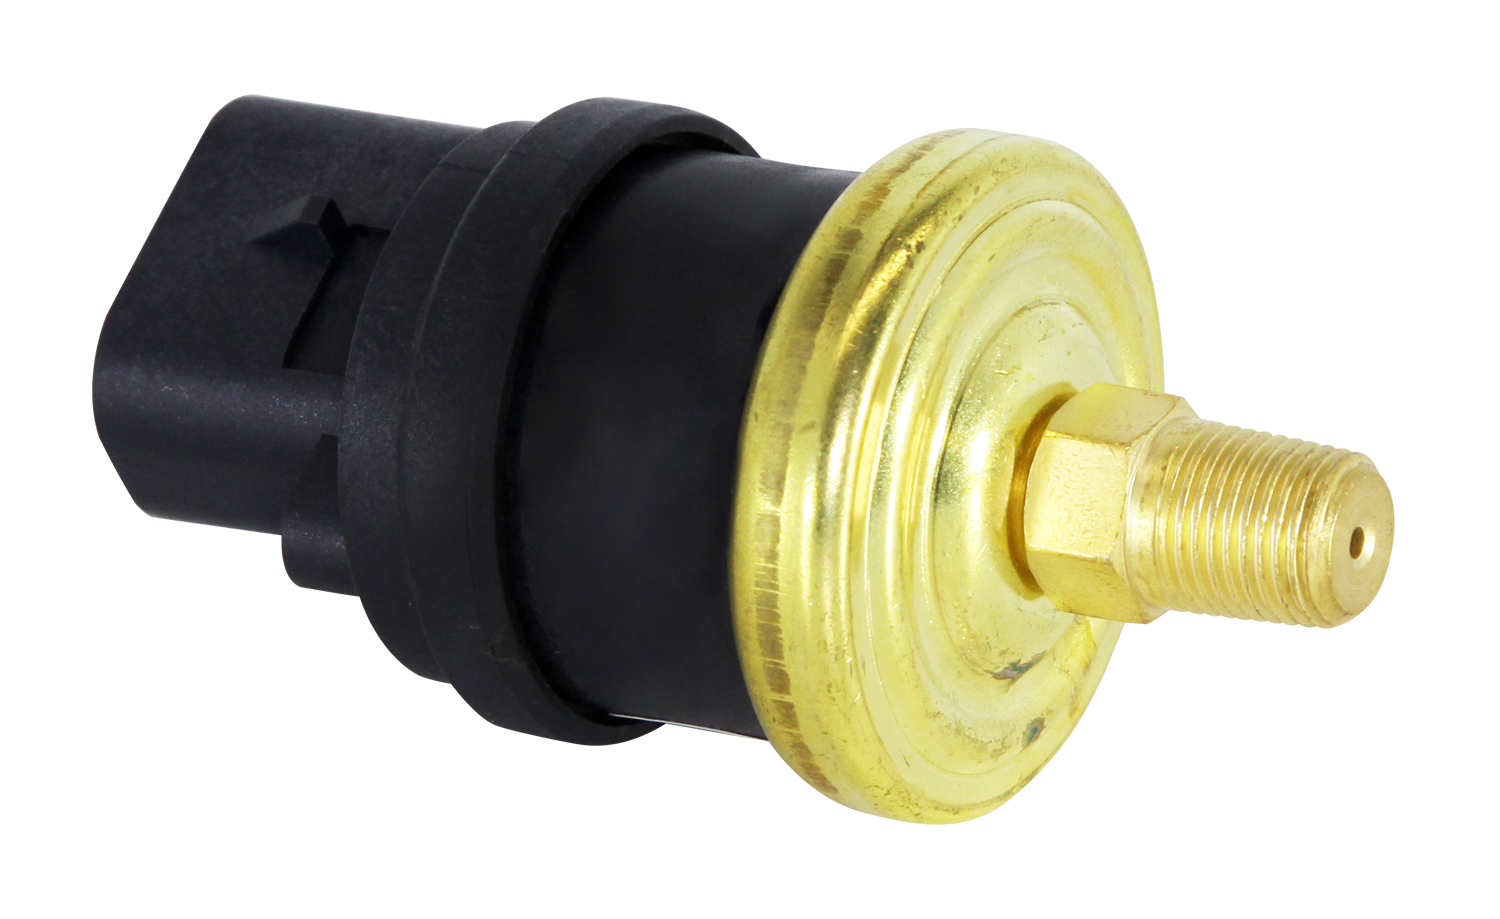 Pressure Switch, 4PSI, SPST M/P280S *** RCS-007 or HIH REQUIRED FOR CO